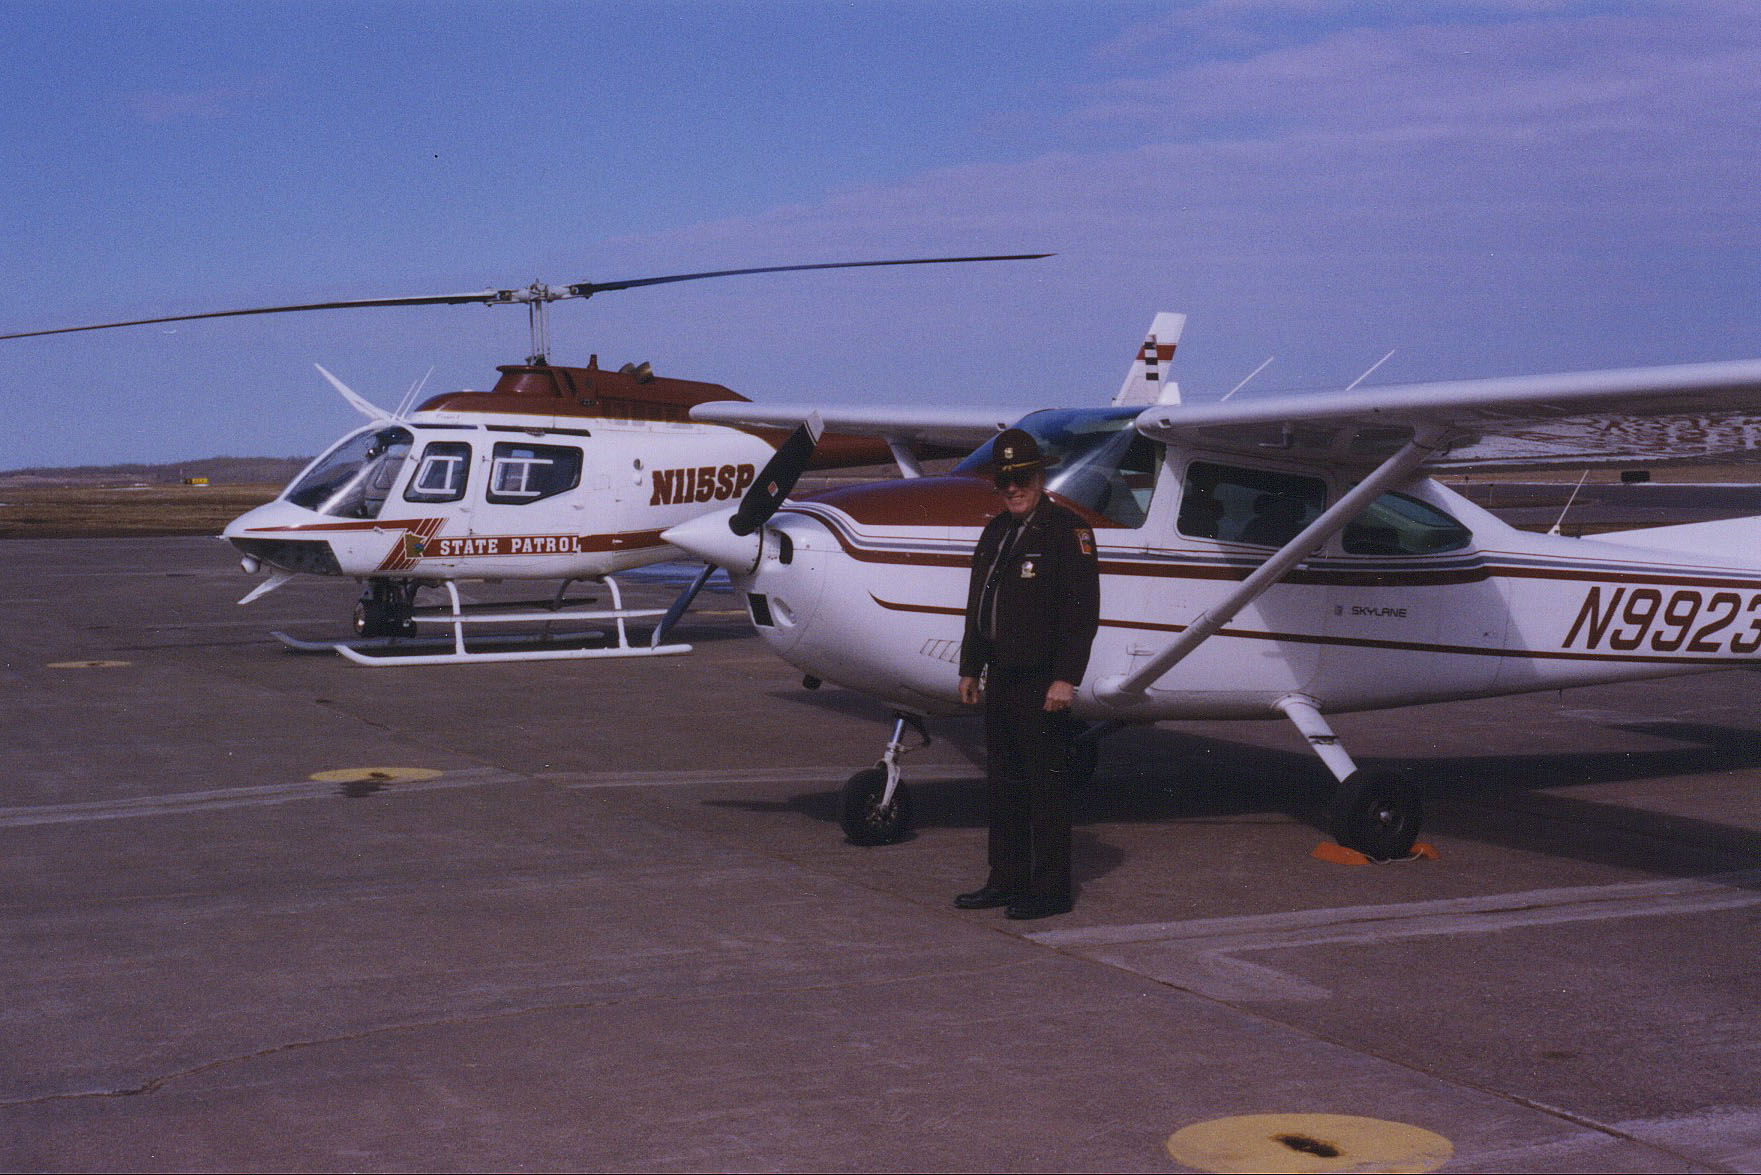 A trooper standing next to a fixed-wing aircraft and a helicopter in the background